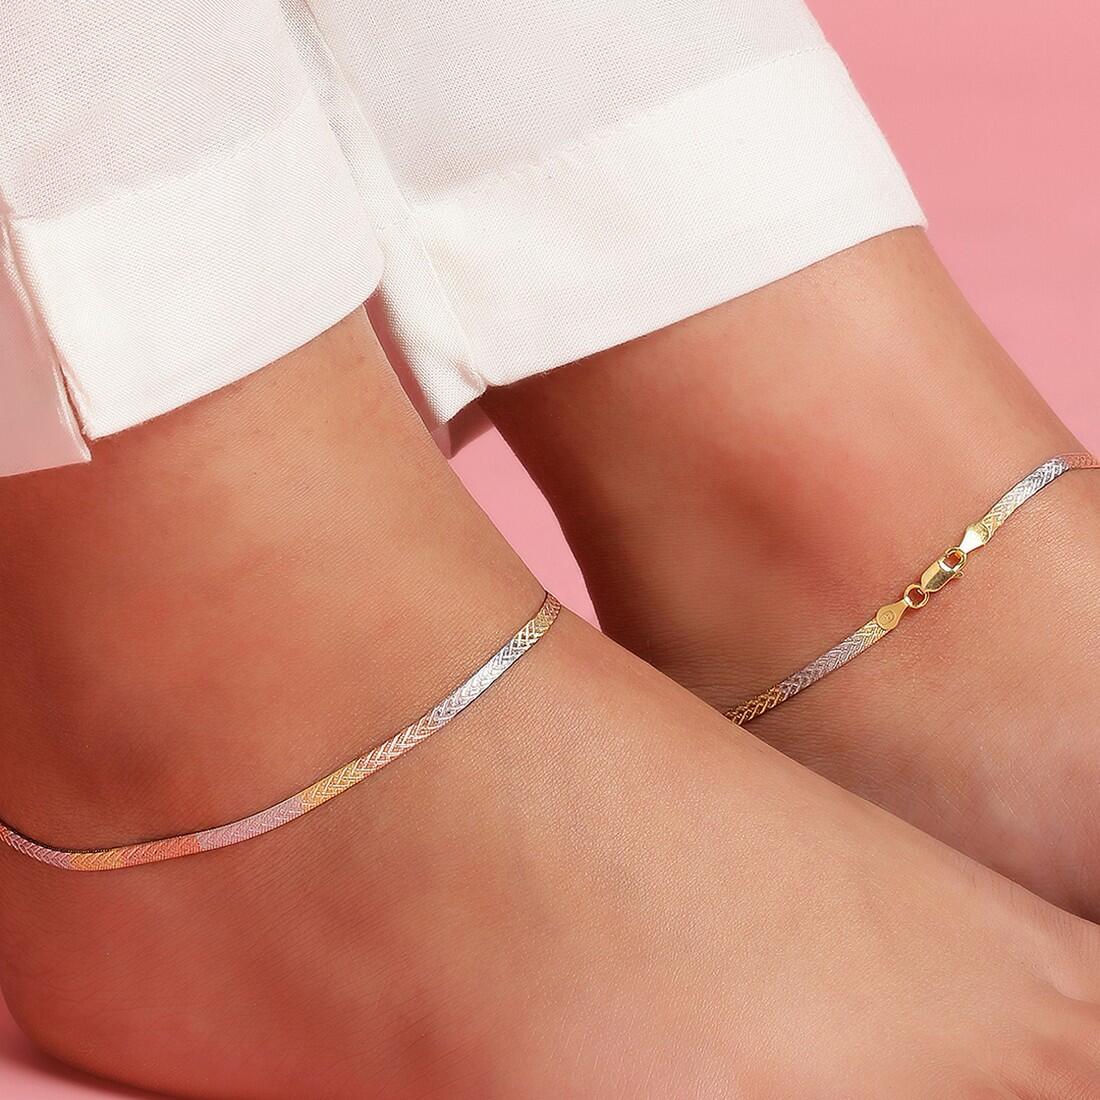 Mystical 925 Silver Anklet in Triple Tone